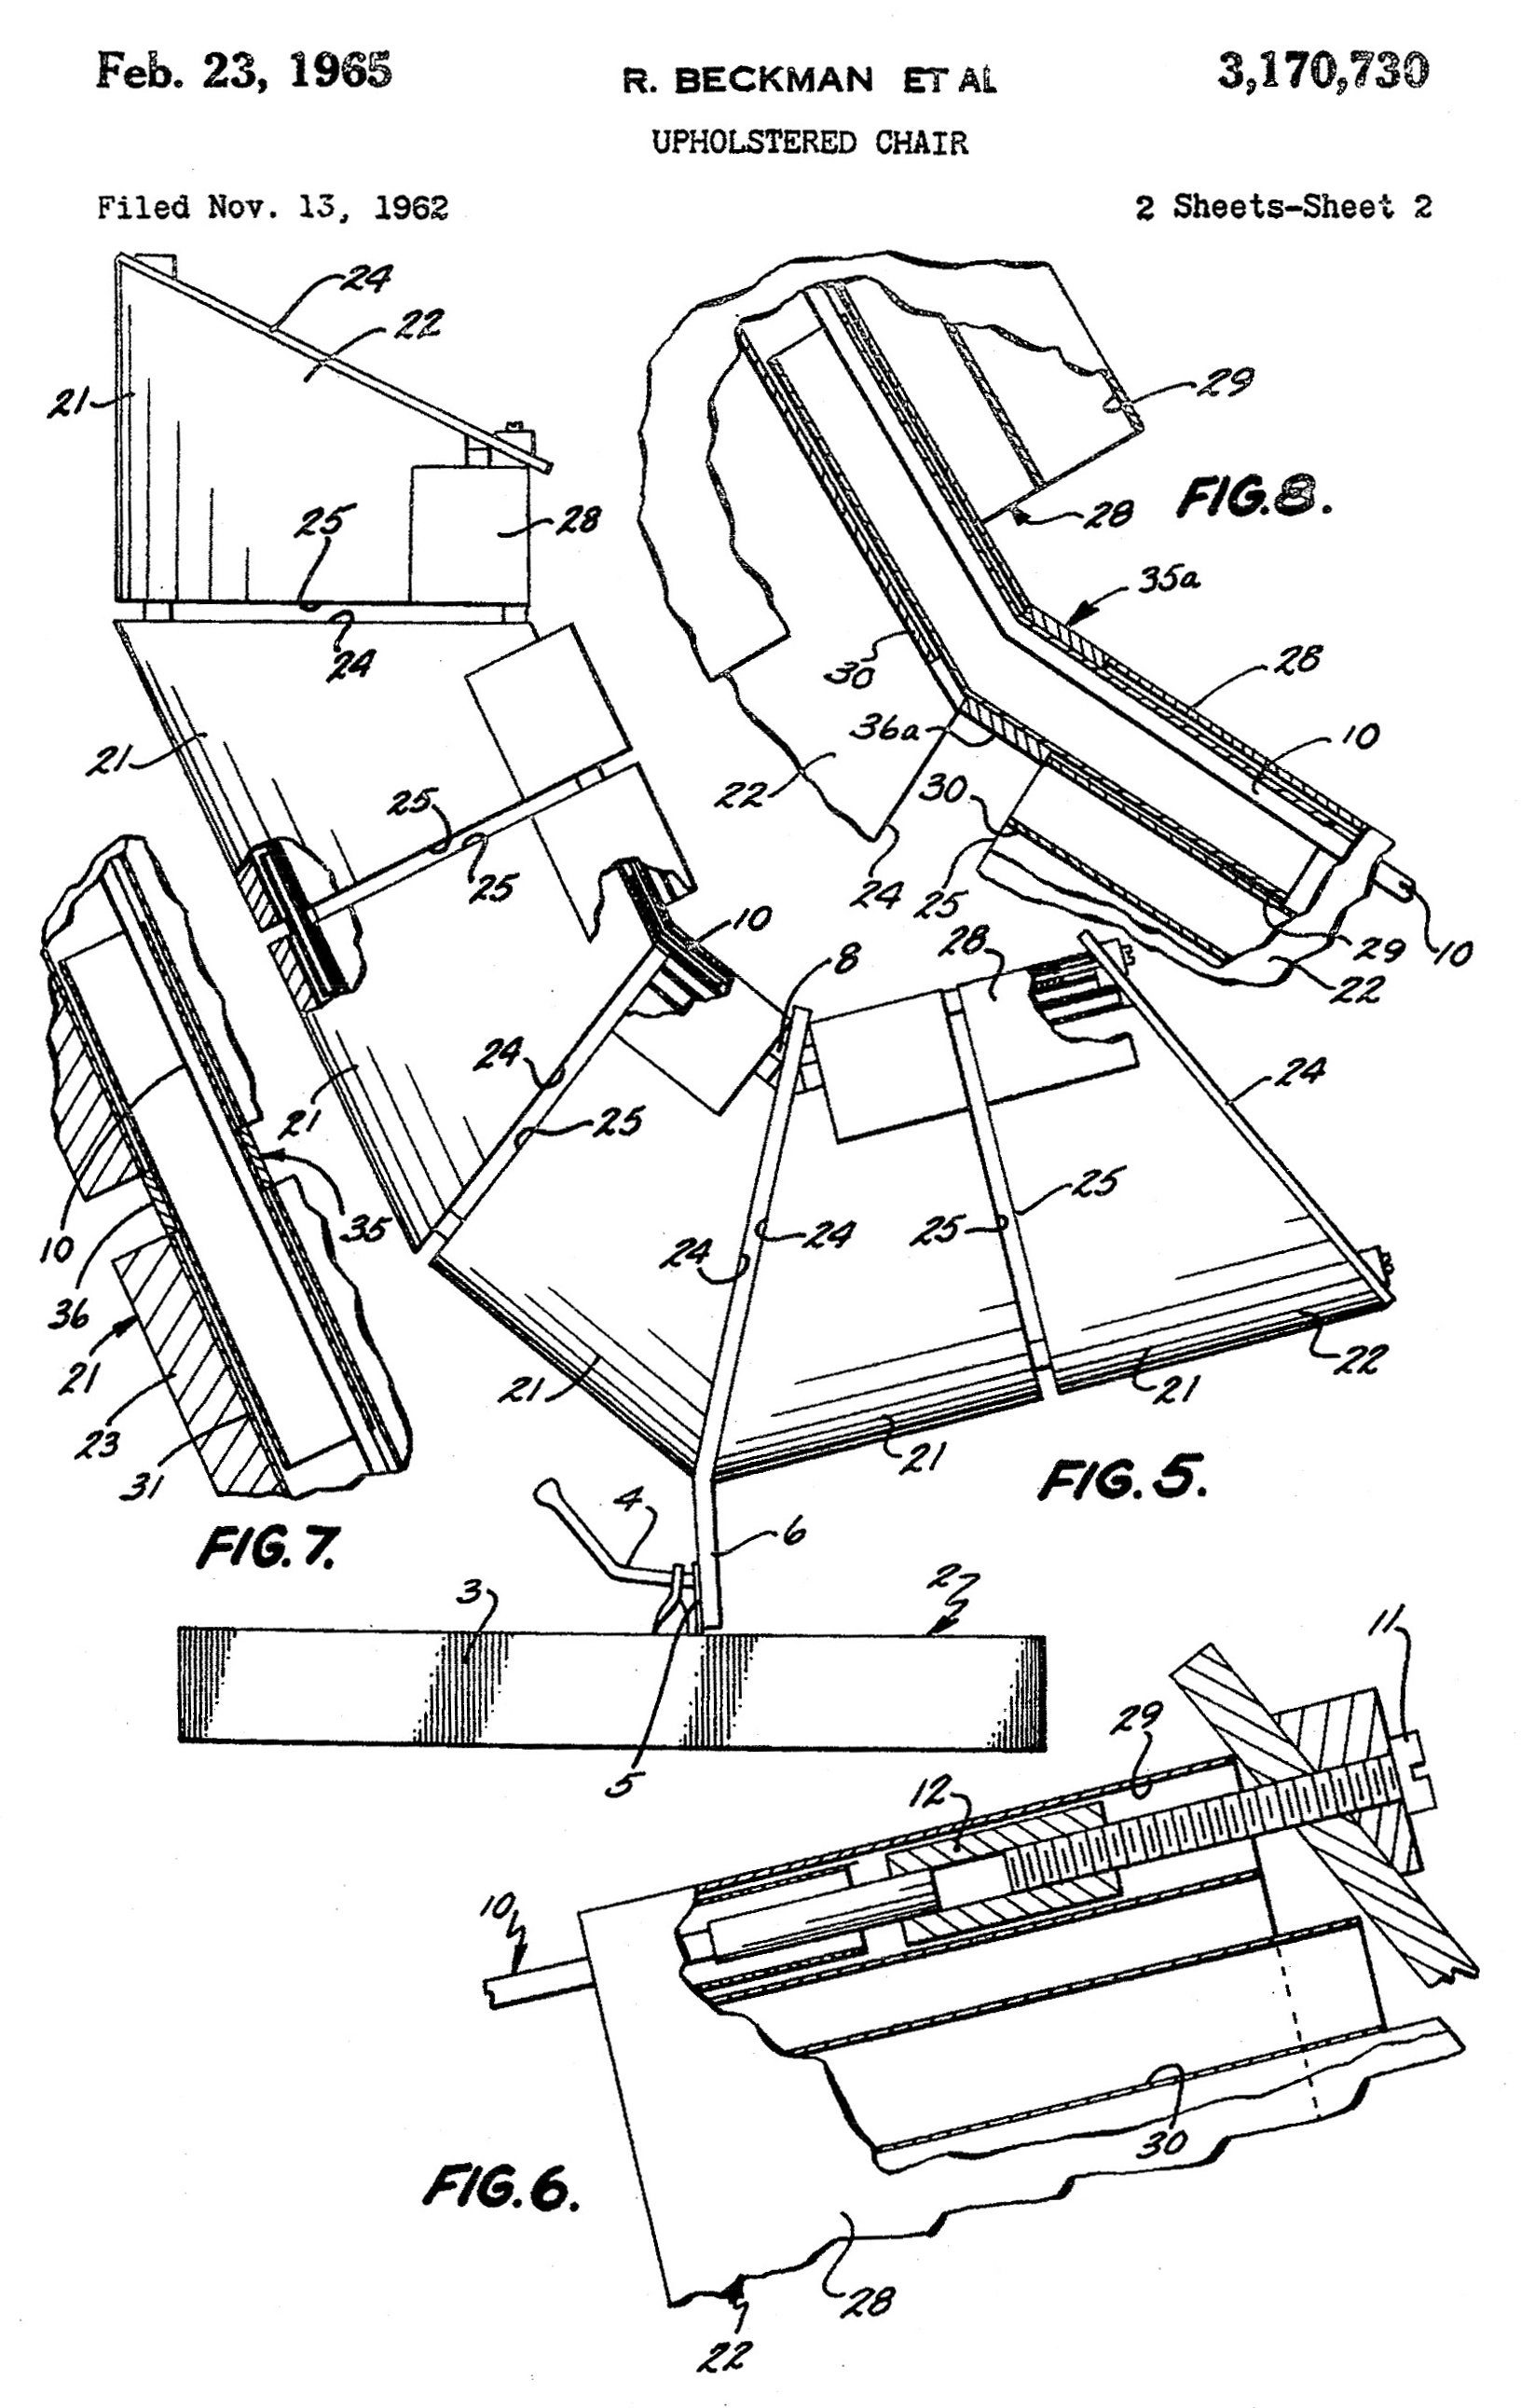 Diagram of segmented chair sections drawn by US Patent Office